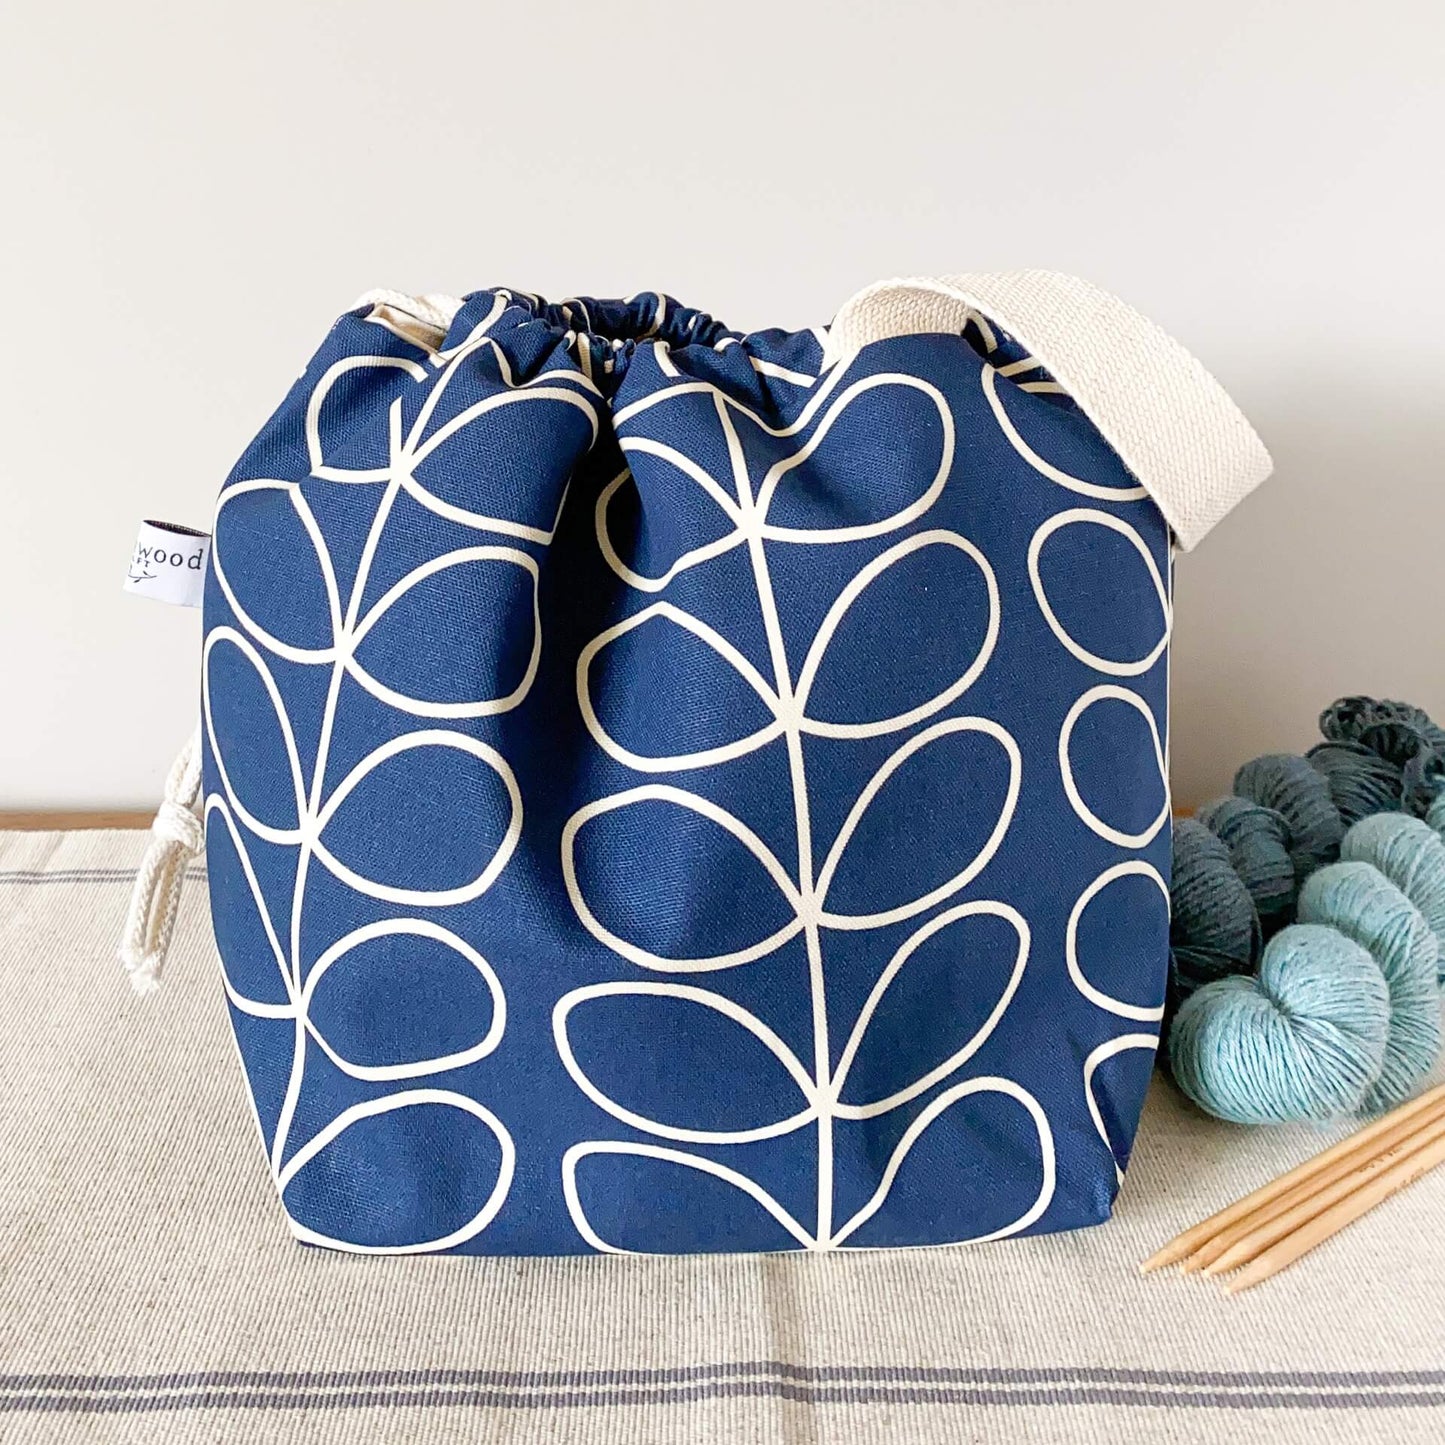 A navy blue knitting project featuring a linear stem print sits on a table next to two skeins of blue yarn and a set of wooden knitting needles. 